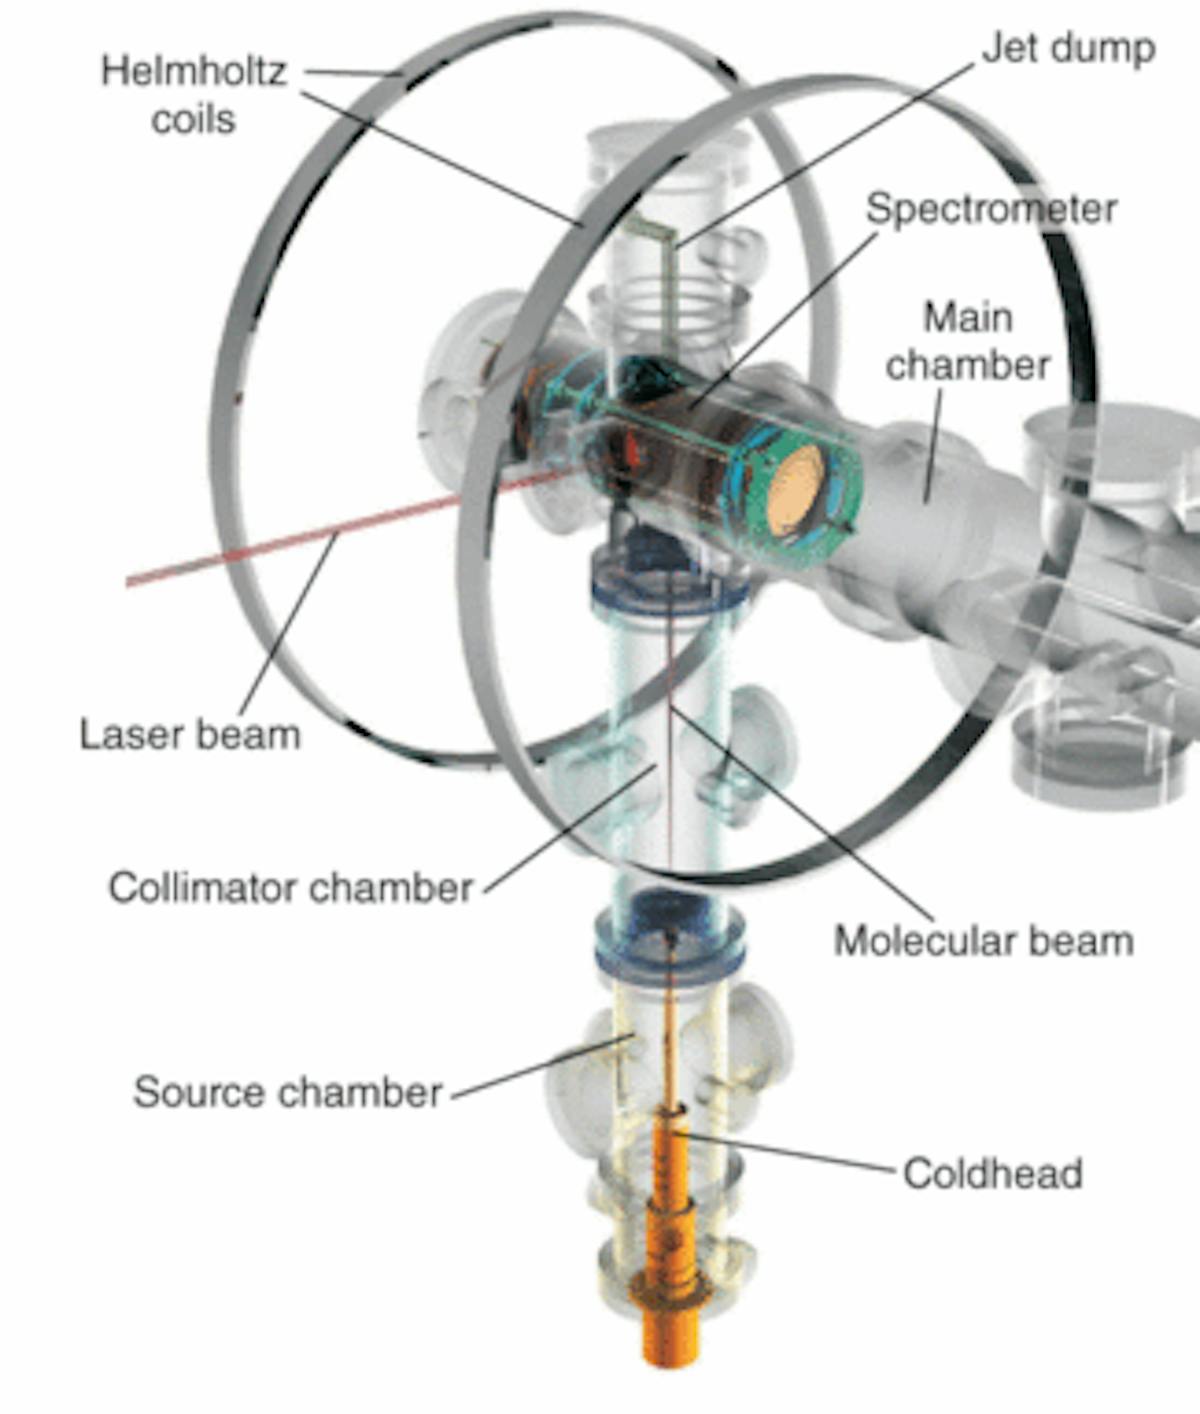 The horizontal main chamber in this COLTRIMS system houses the spectrometer. A cold beam of molecules is created in the lower portion of the vertical tube and fed through the laser focus in the main chamber, where the electrons can be extracted from and recollided with parent molecules during the same pulse cycle to create sequential &ldquo;moving frames&rdquo; of chemical processes.